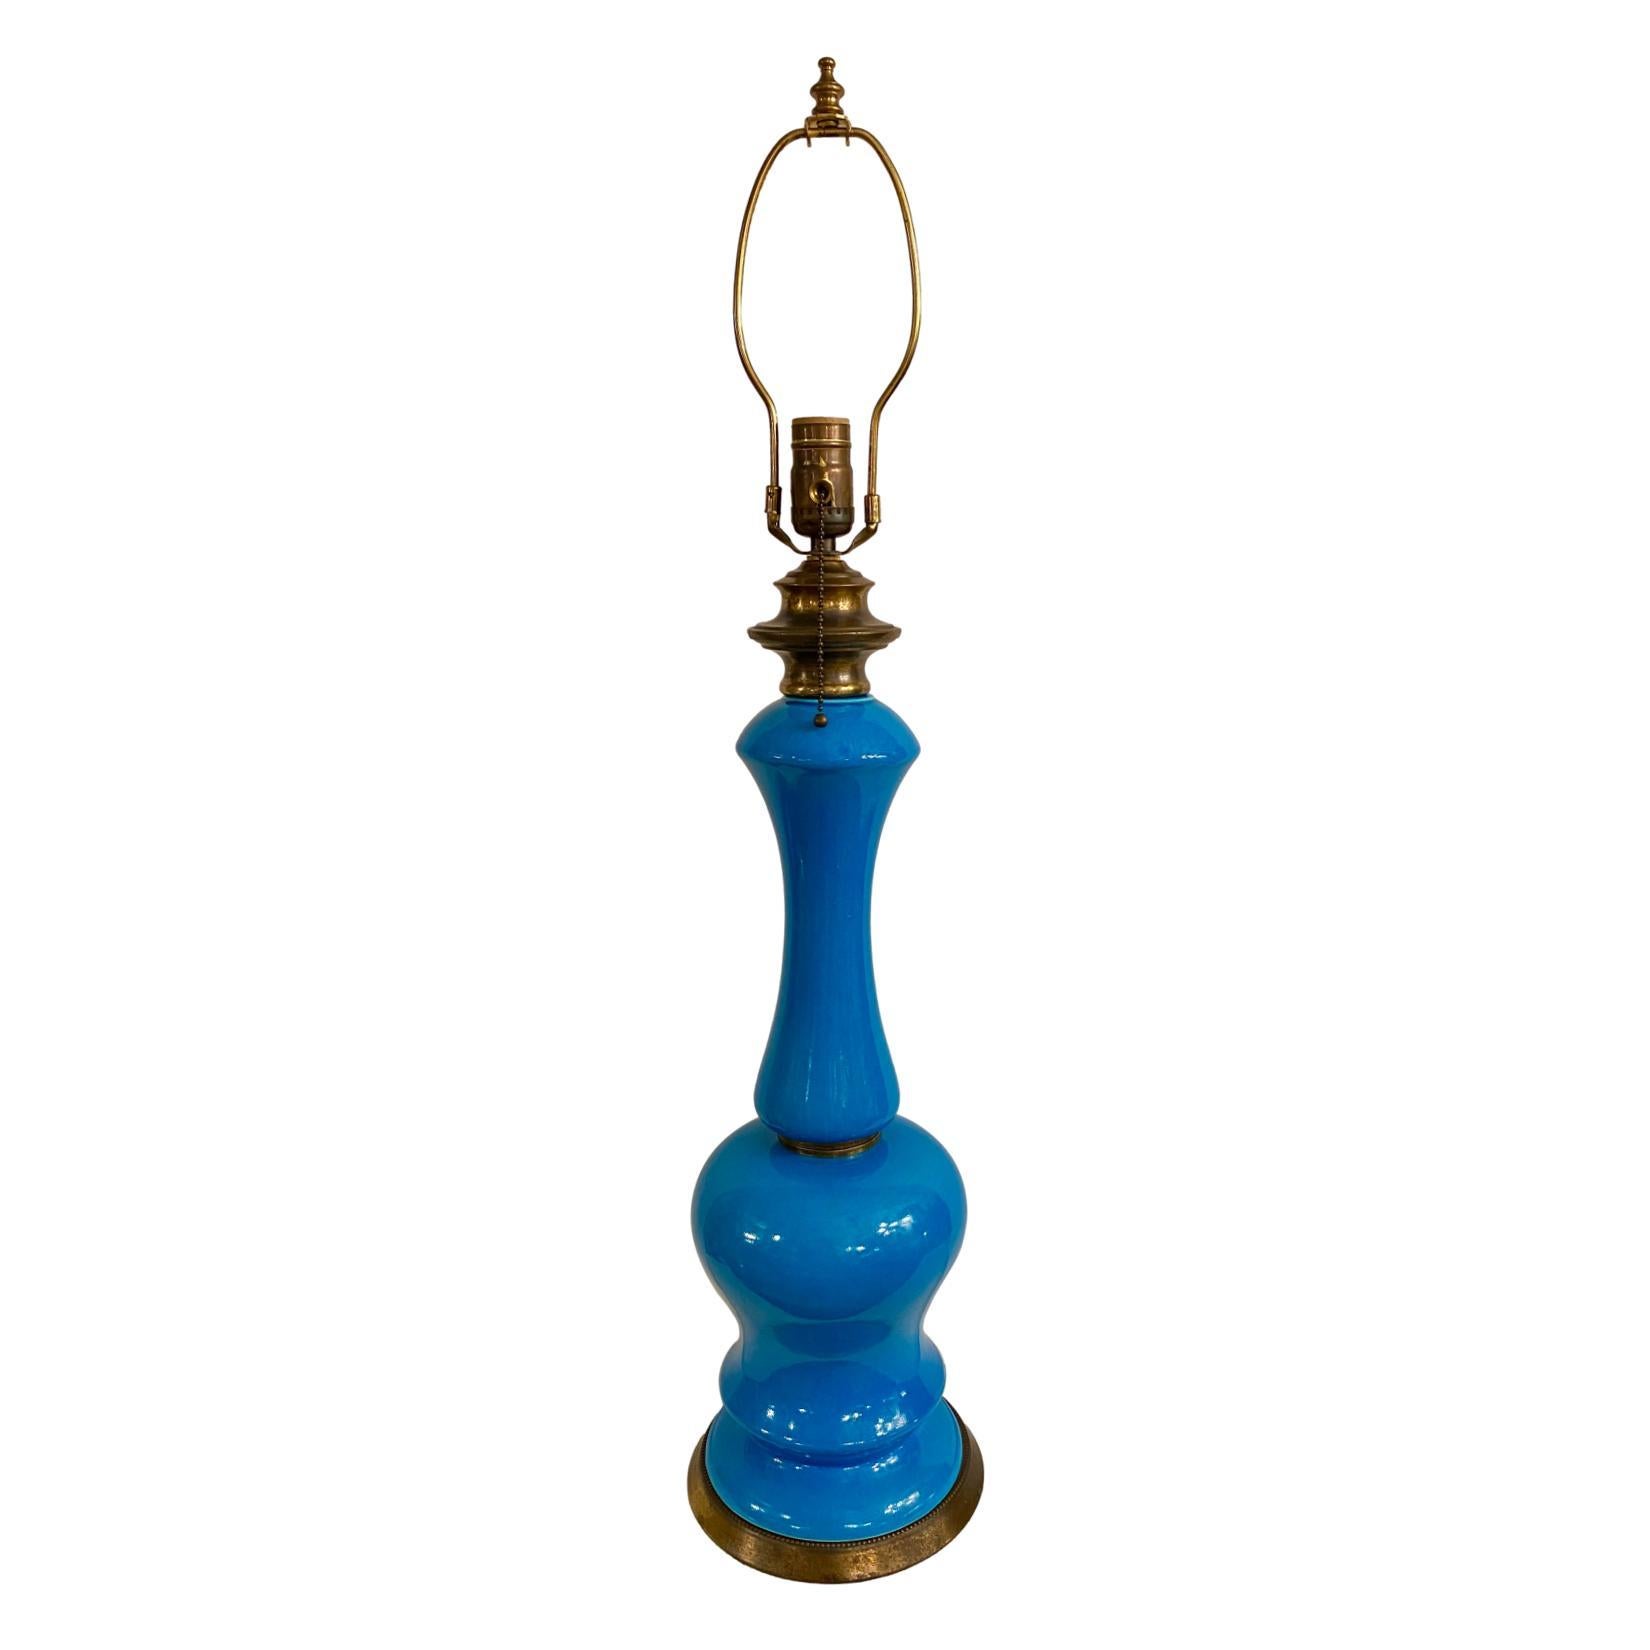 A single French circa 1940's azure blue porcelain table lamp.

Measurements:
Height of body: 21